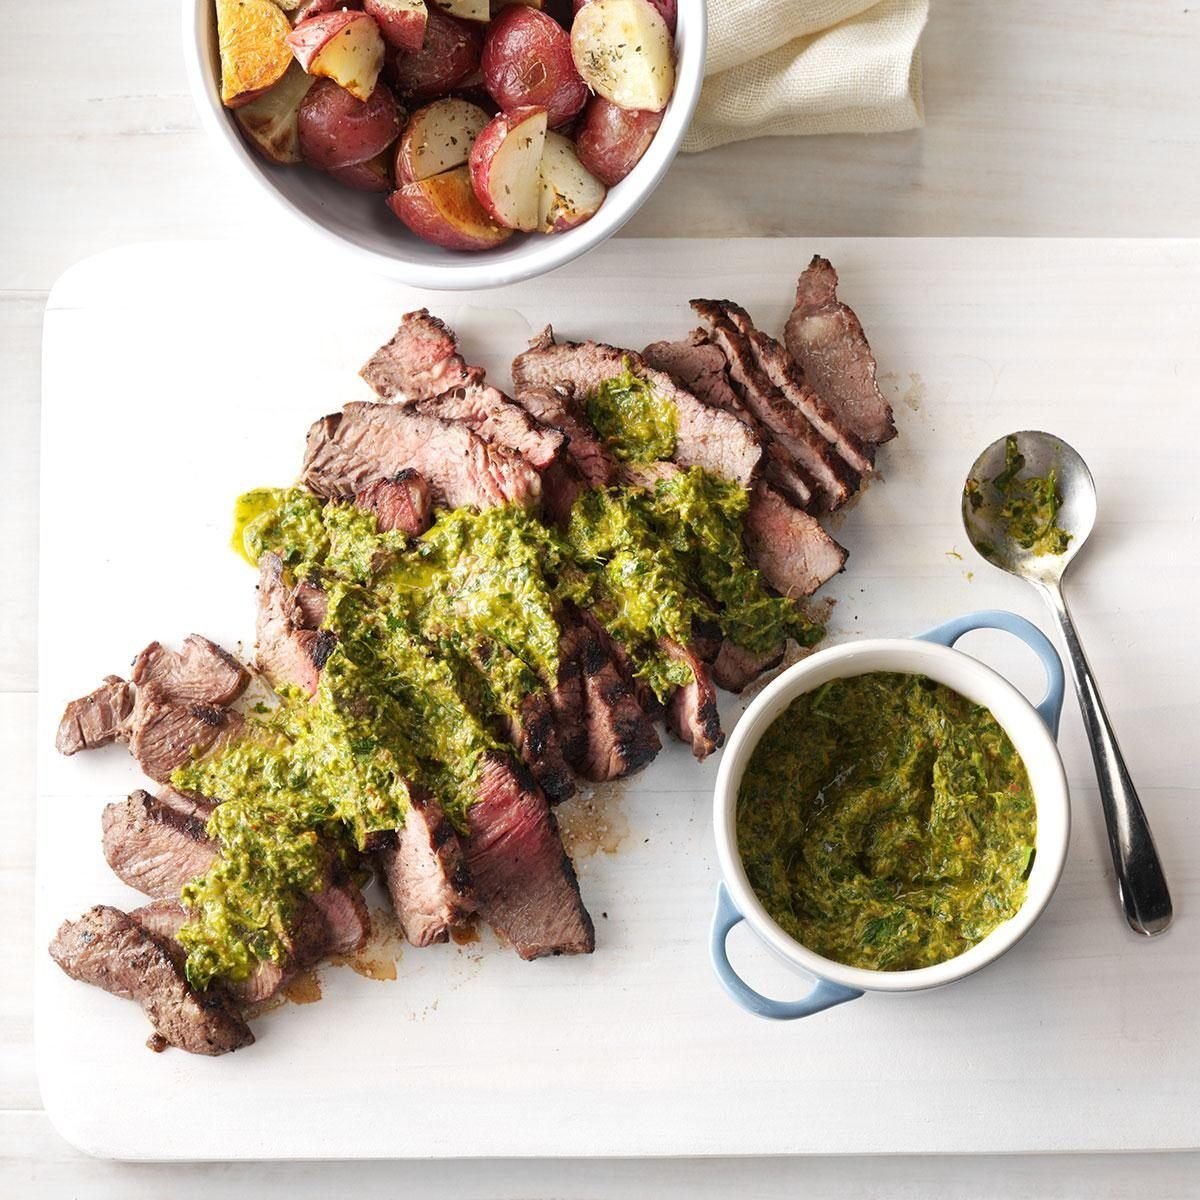 Steak with Chipotle-Lime Chimichurri